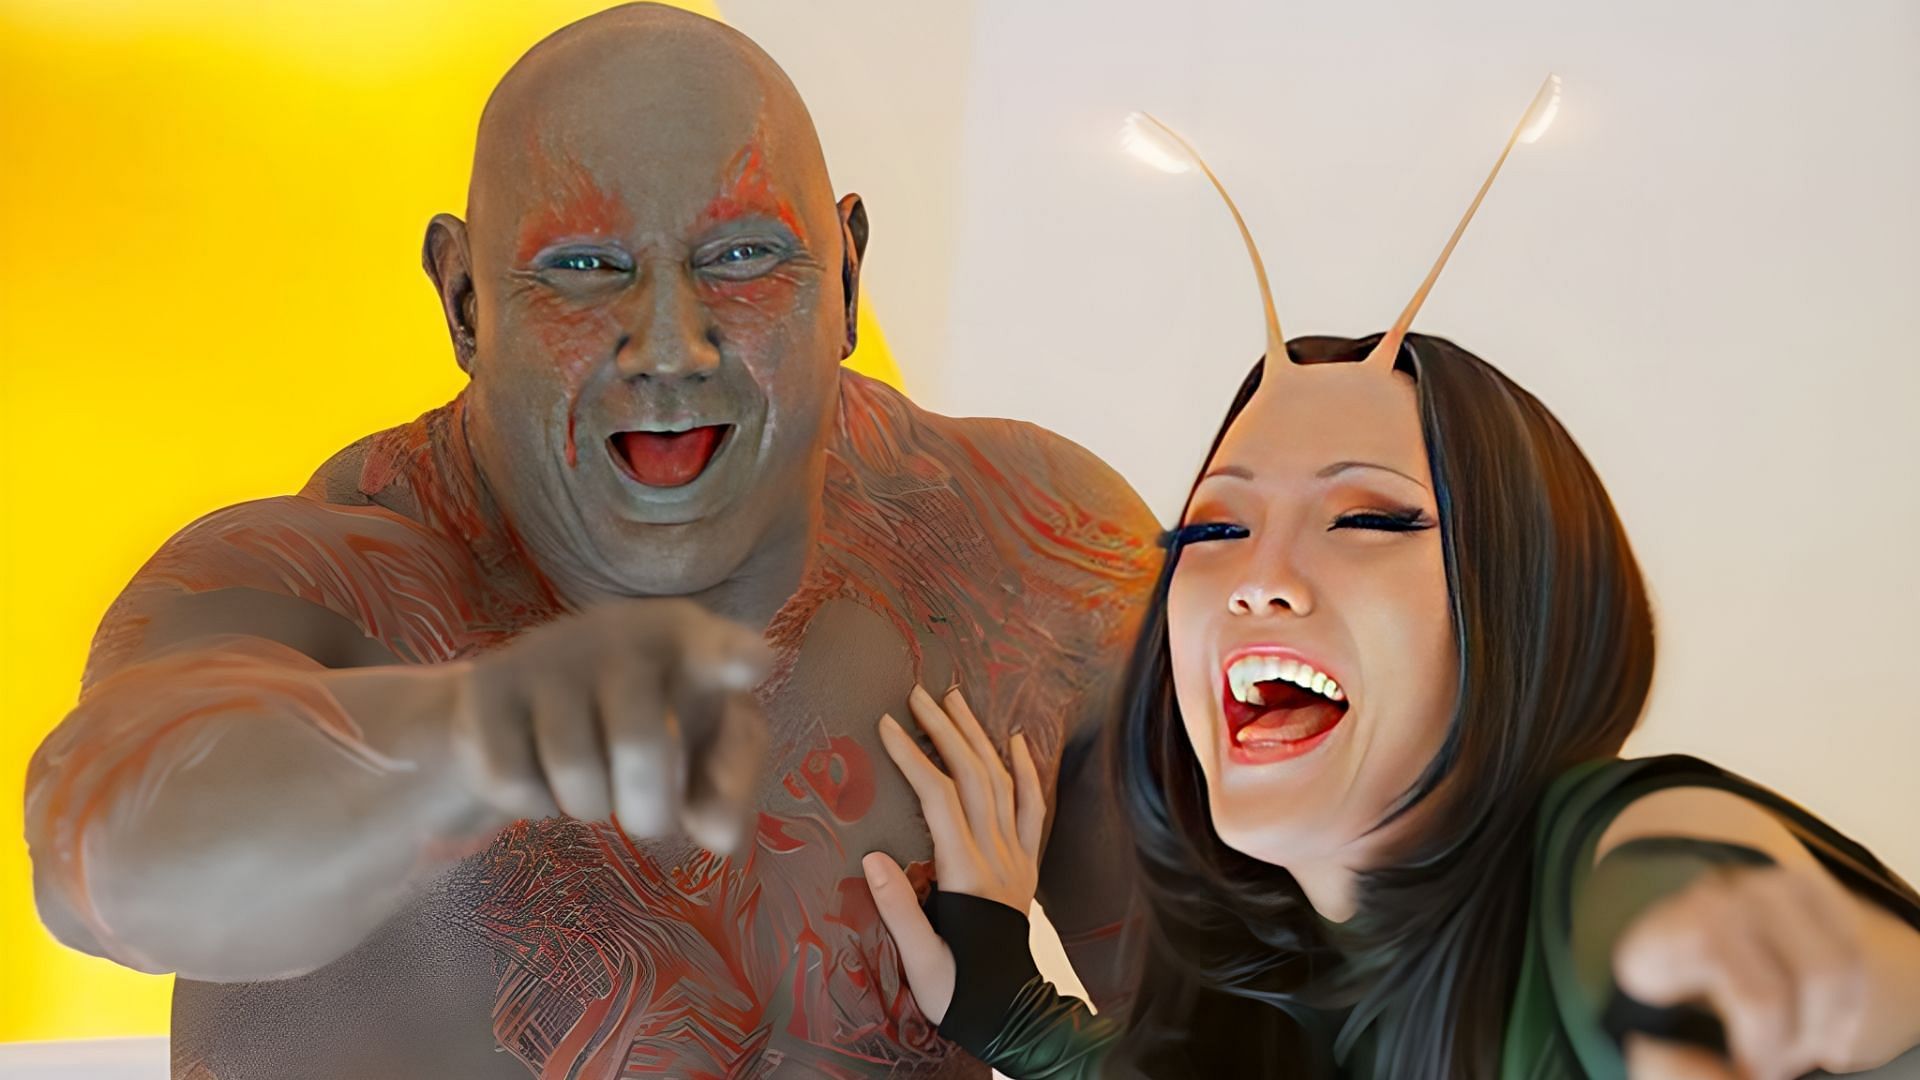 Drax displays his softer side with Mantis, showing her kindness and respect. (Image via Marvel)